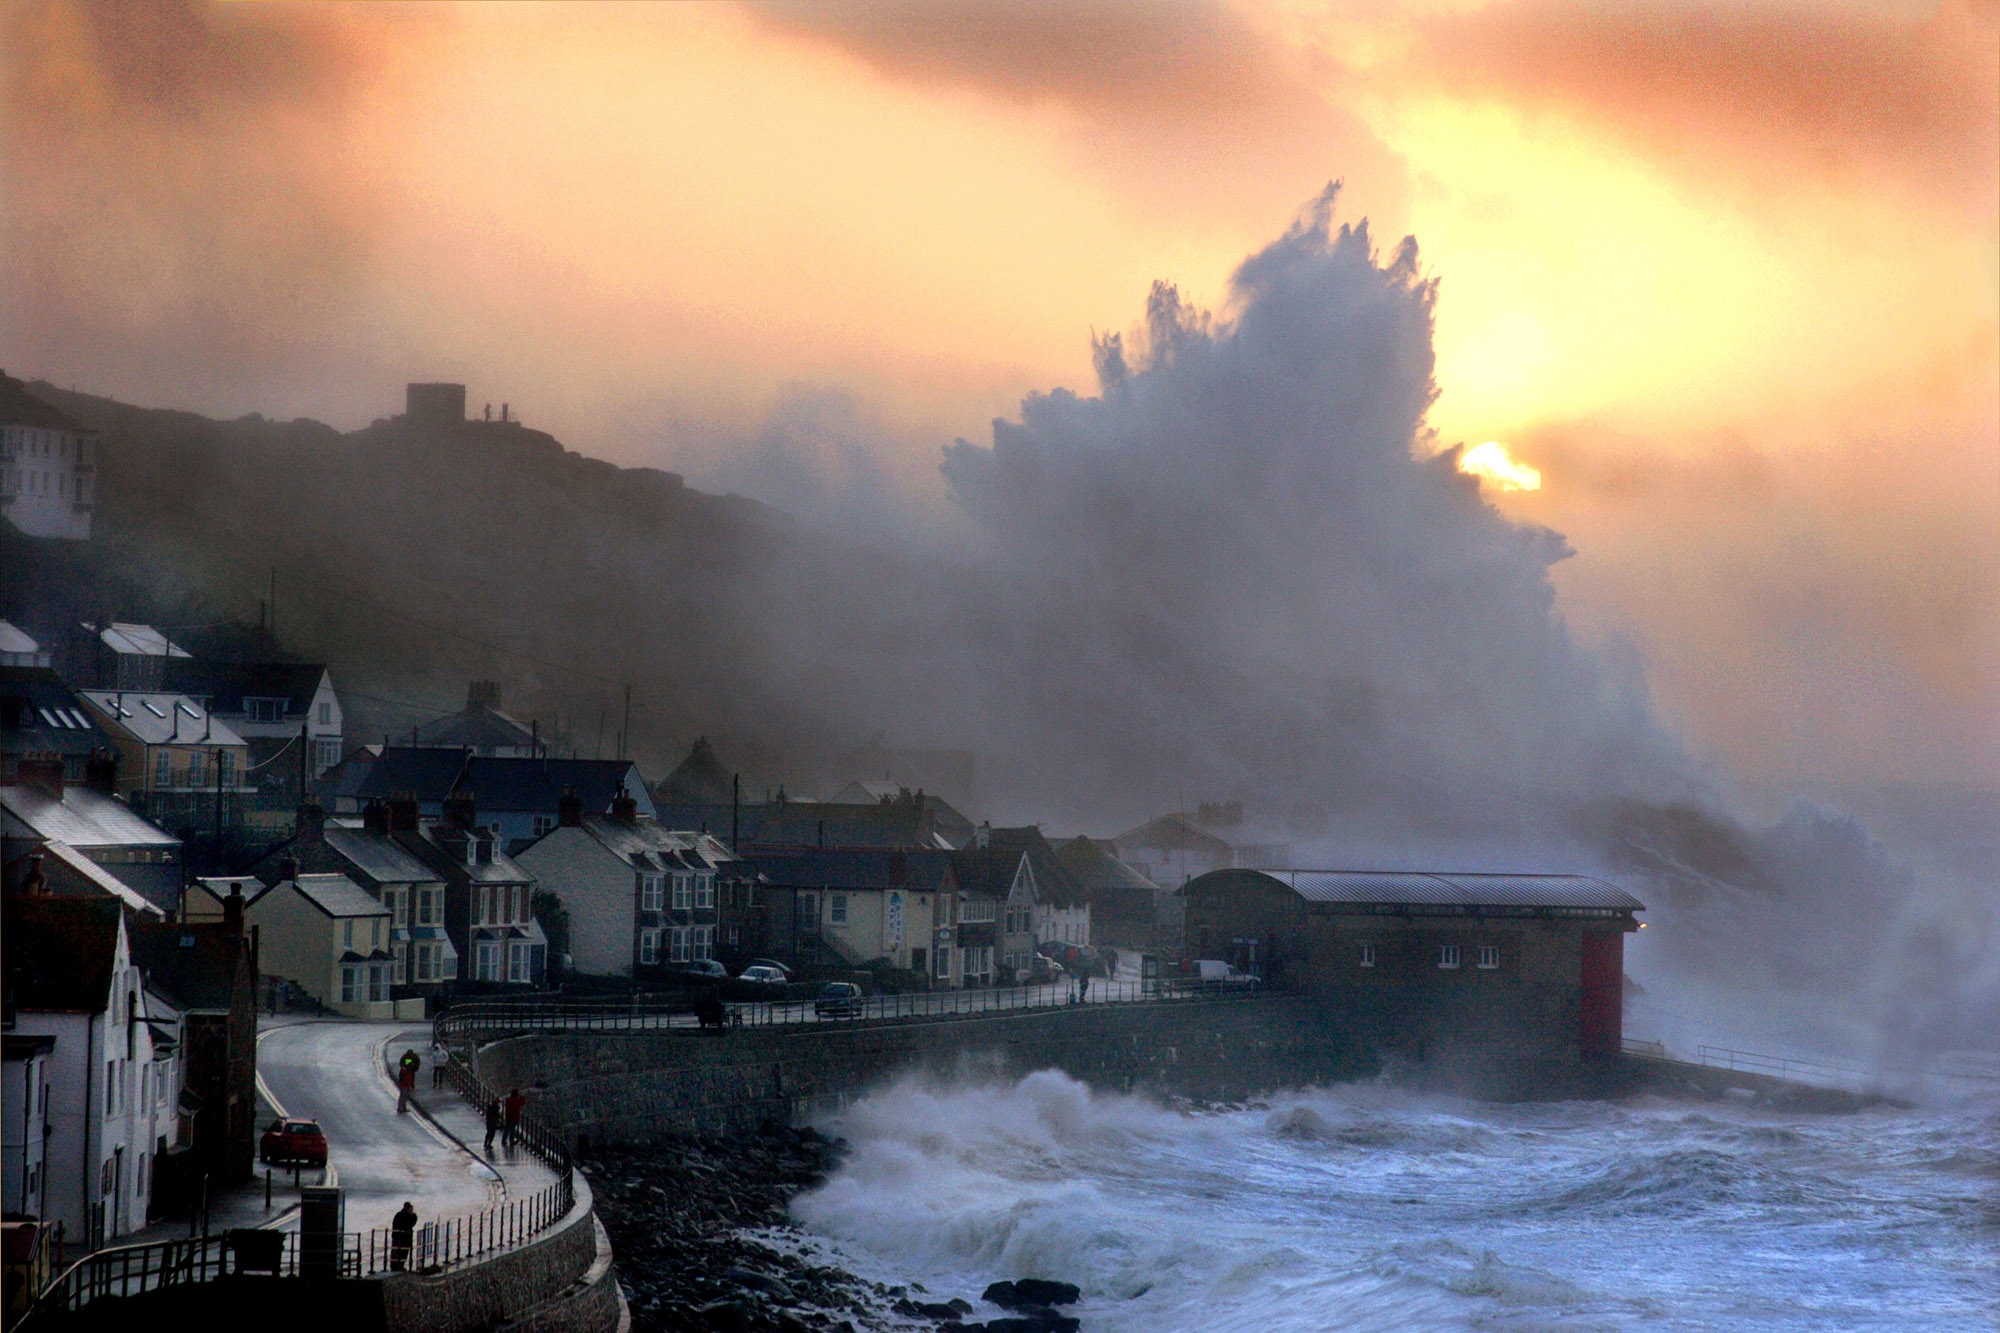 POSTPONED - Waves & Storms: Photographing the Cornish coast